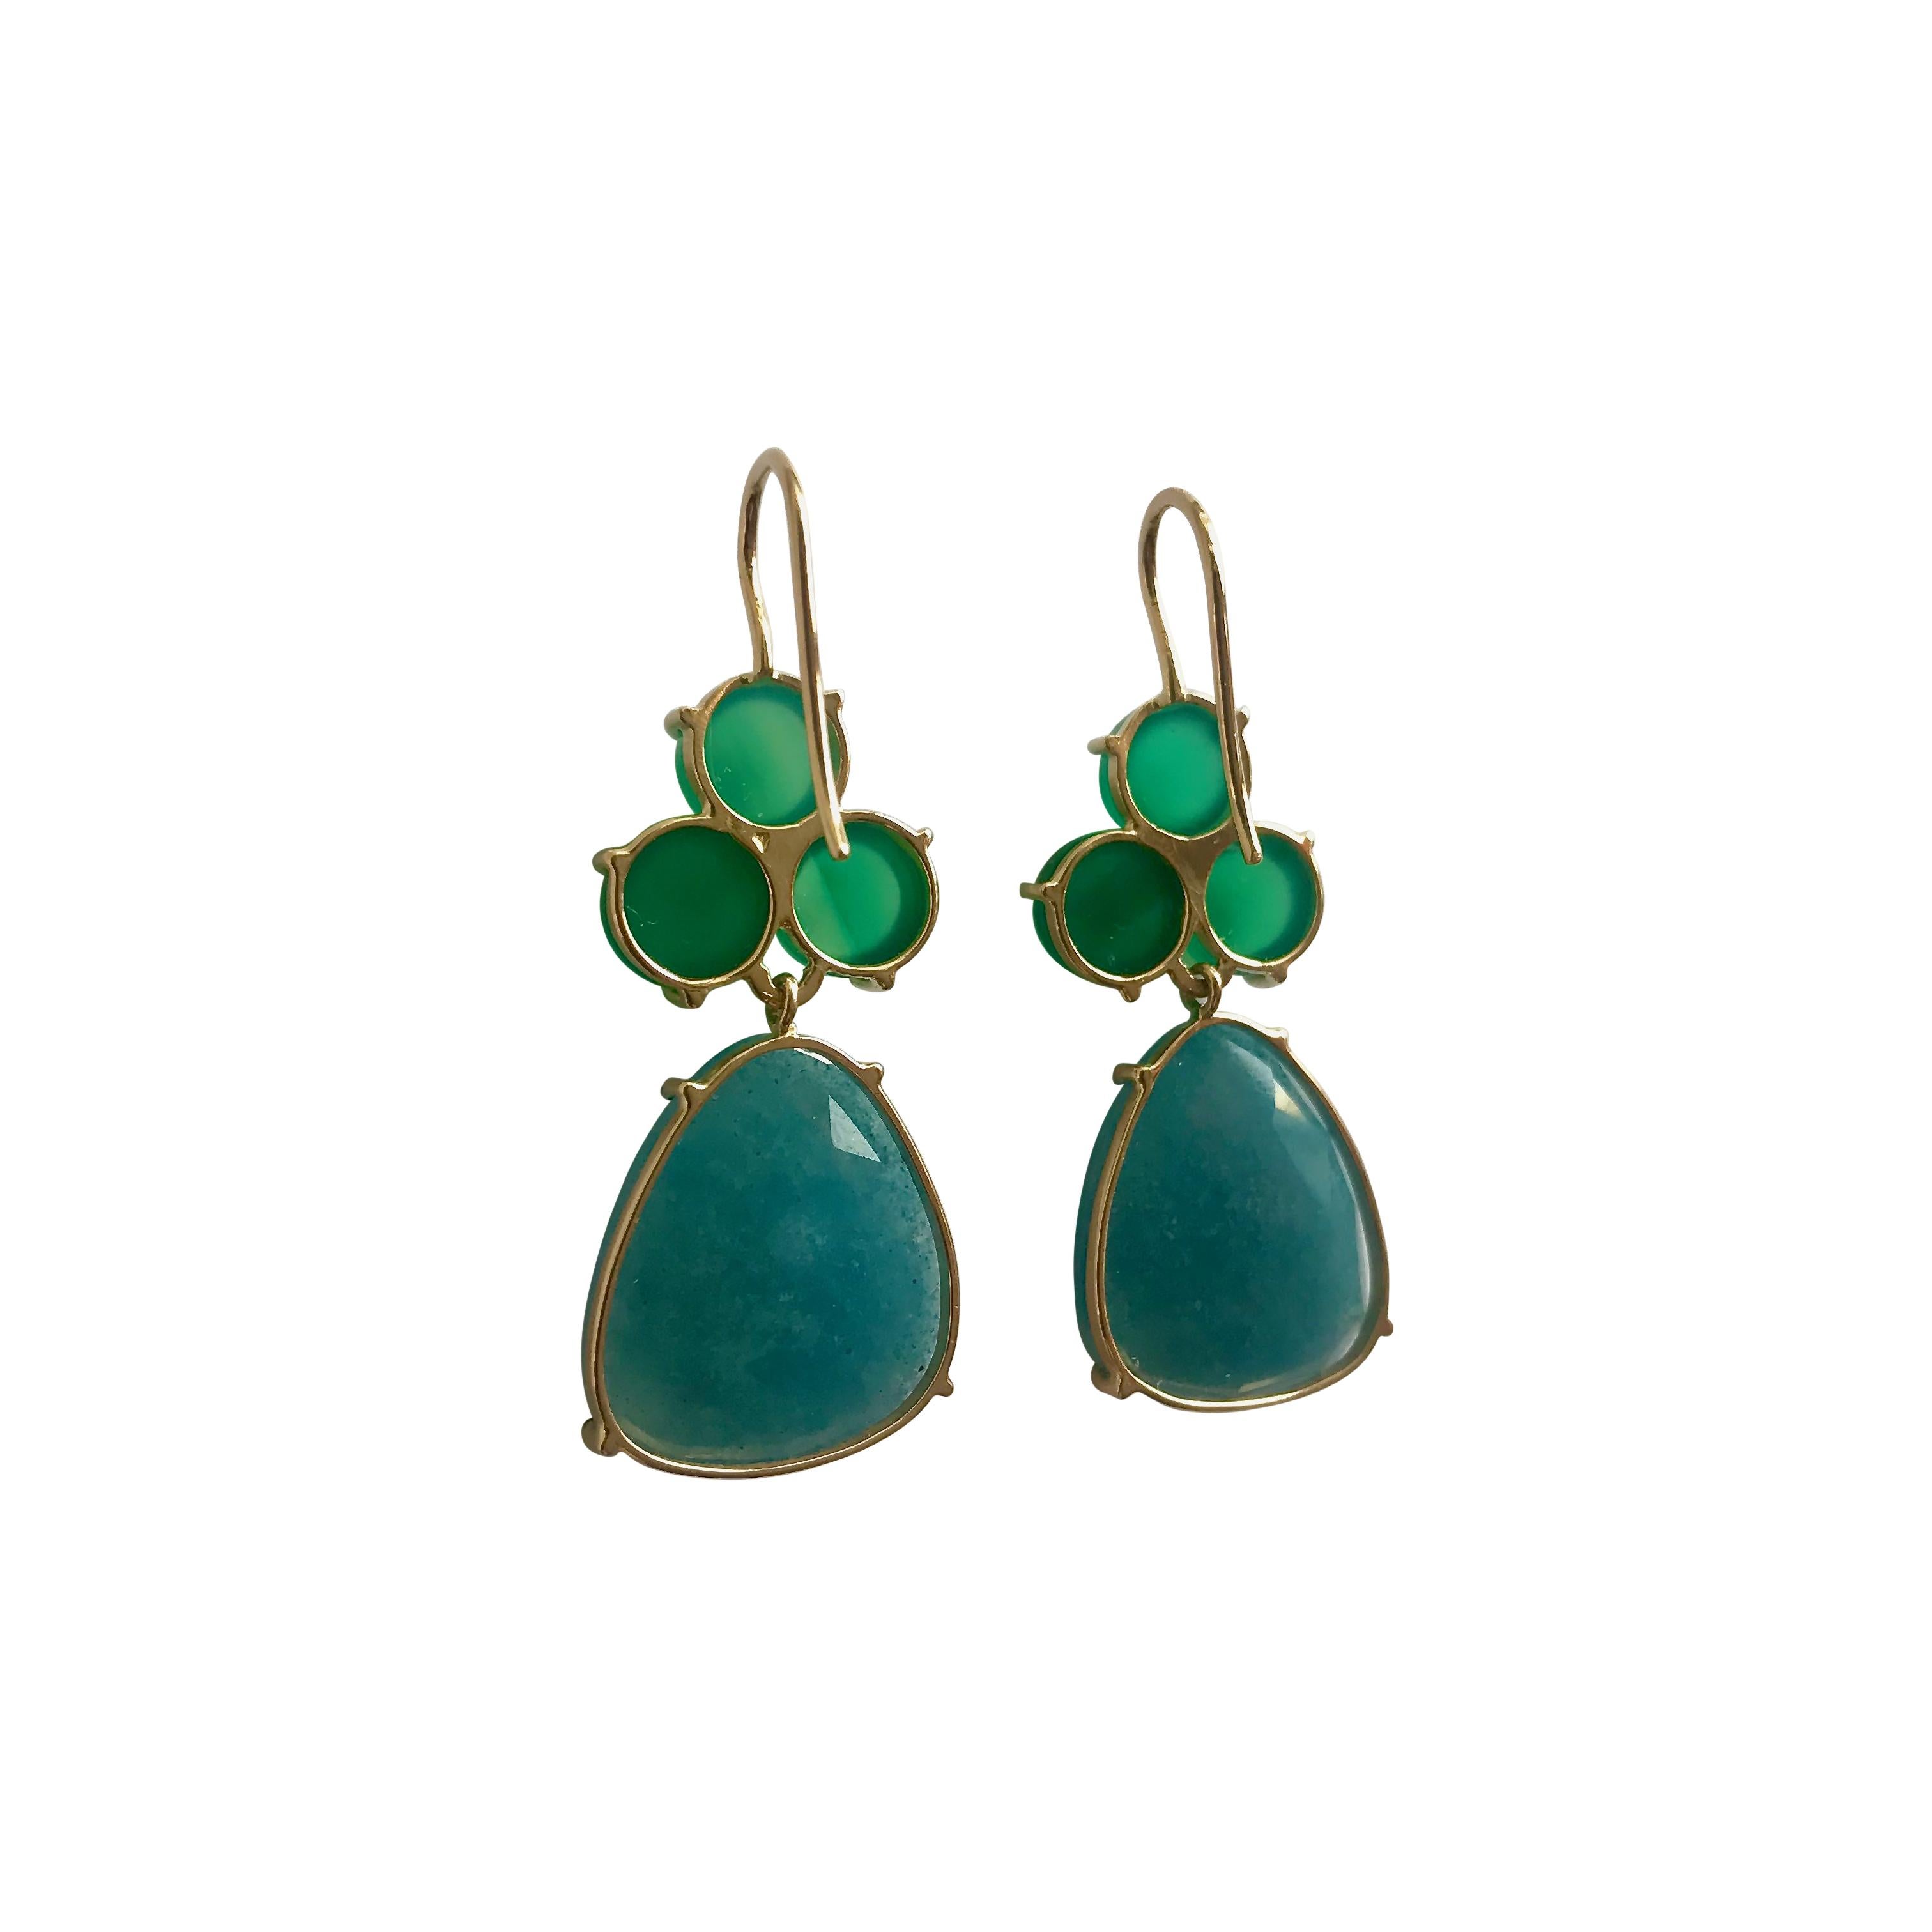 Handcrafted hook drop earrings, made of 18K solid yellow gold, rose-cut blue quartz and cabochon-cut green agates.
Easy to wear and suitable for almost any occasion.
Hallmarked at London Goldsmiths’ Company – Assay Office ( laser mark on the pins )